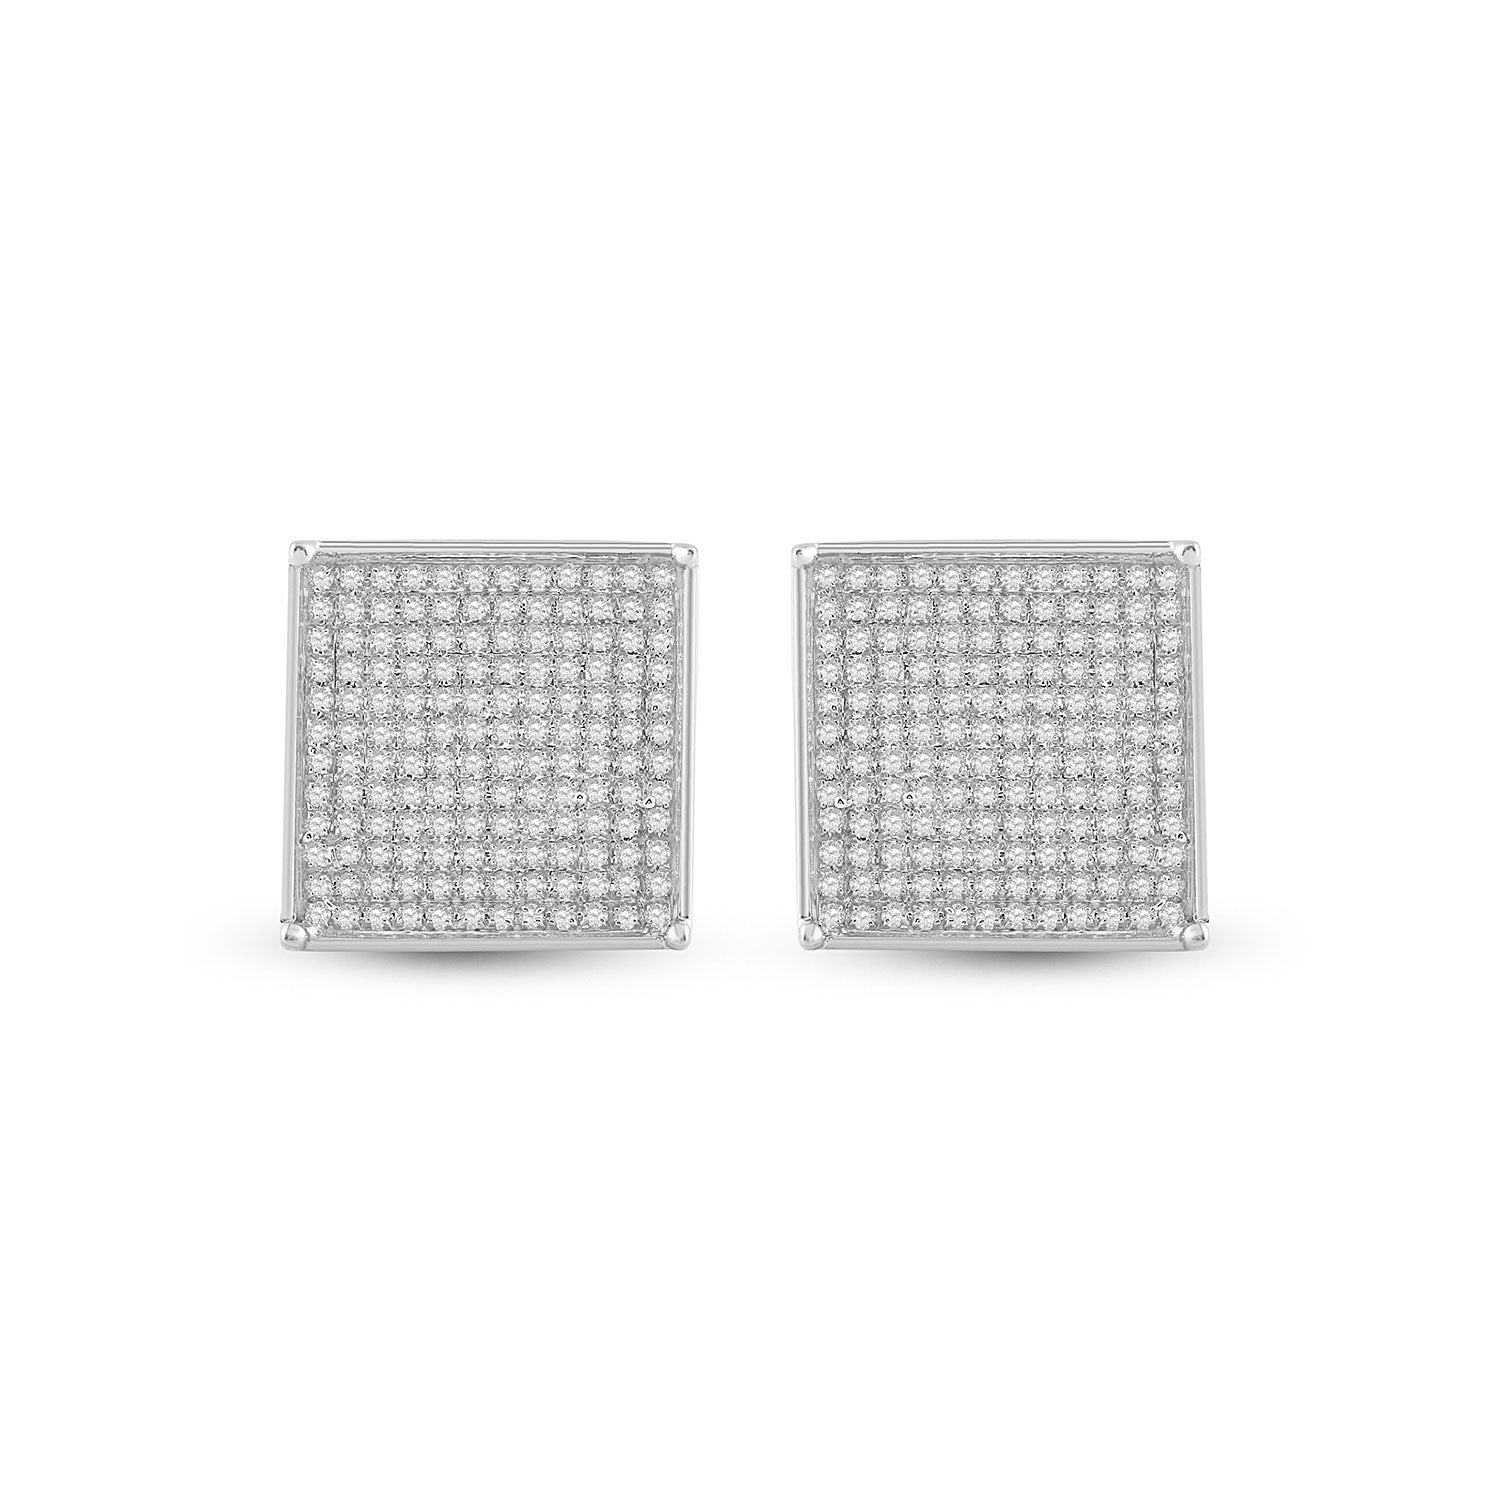 10kt White Gold Womens Round Diamond Square Earrings 7/8 Cttw